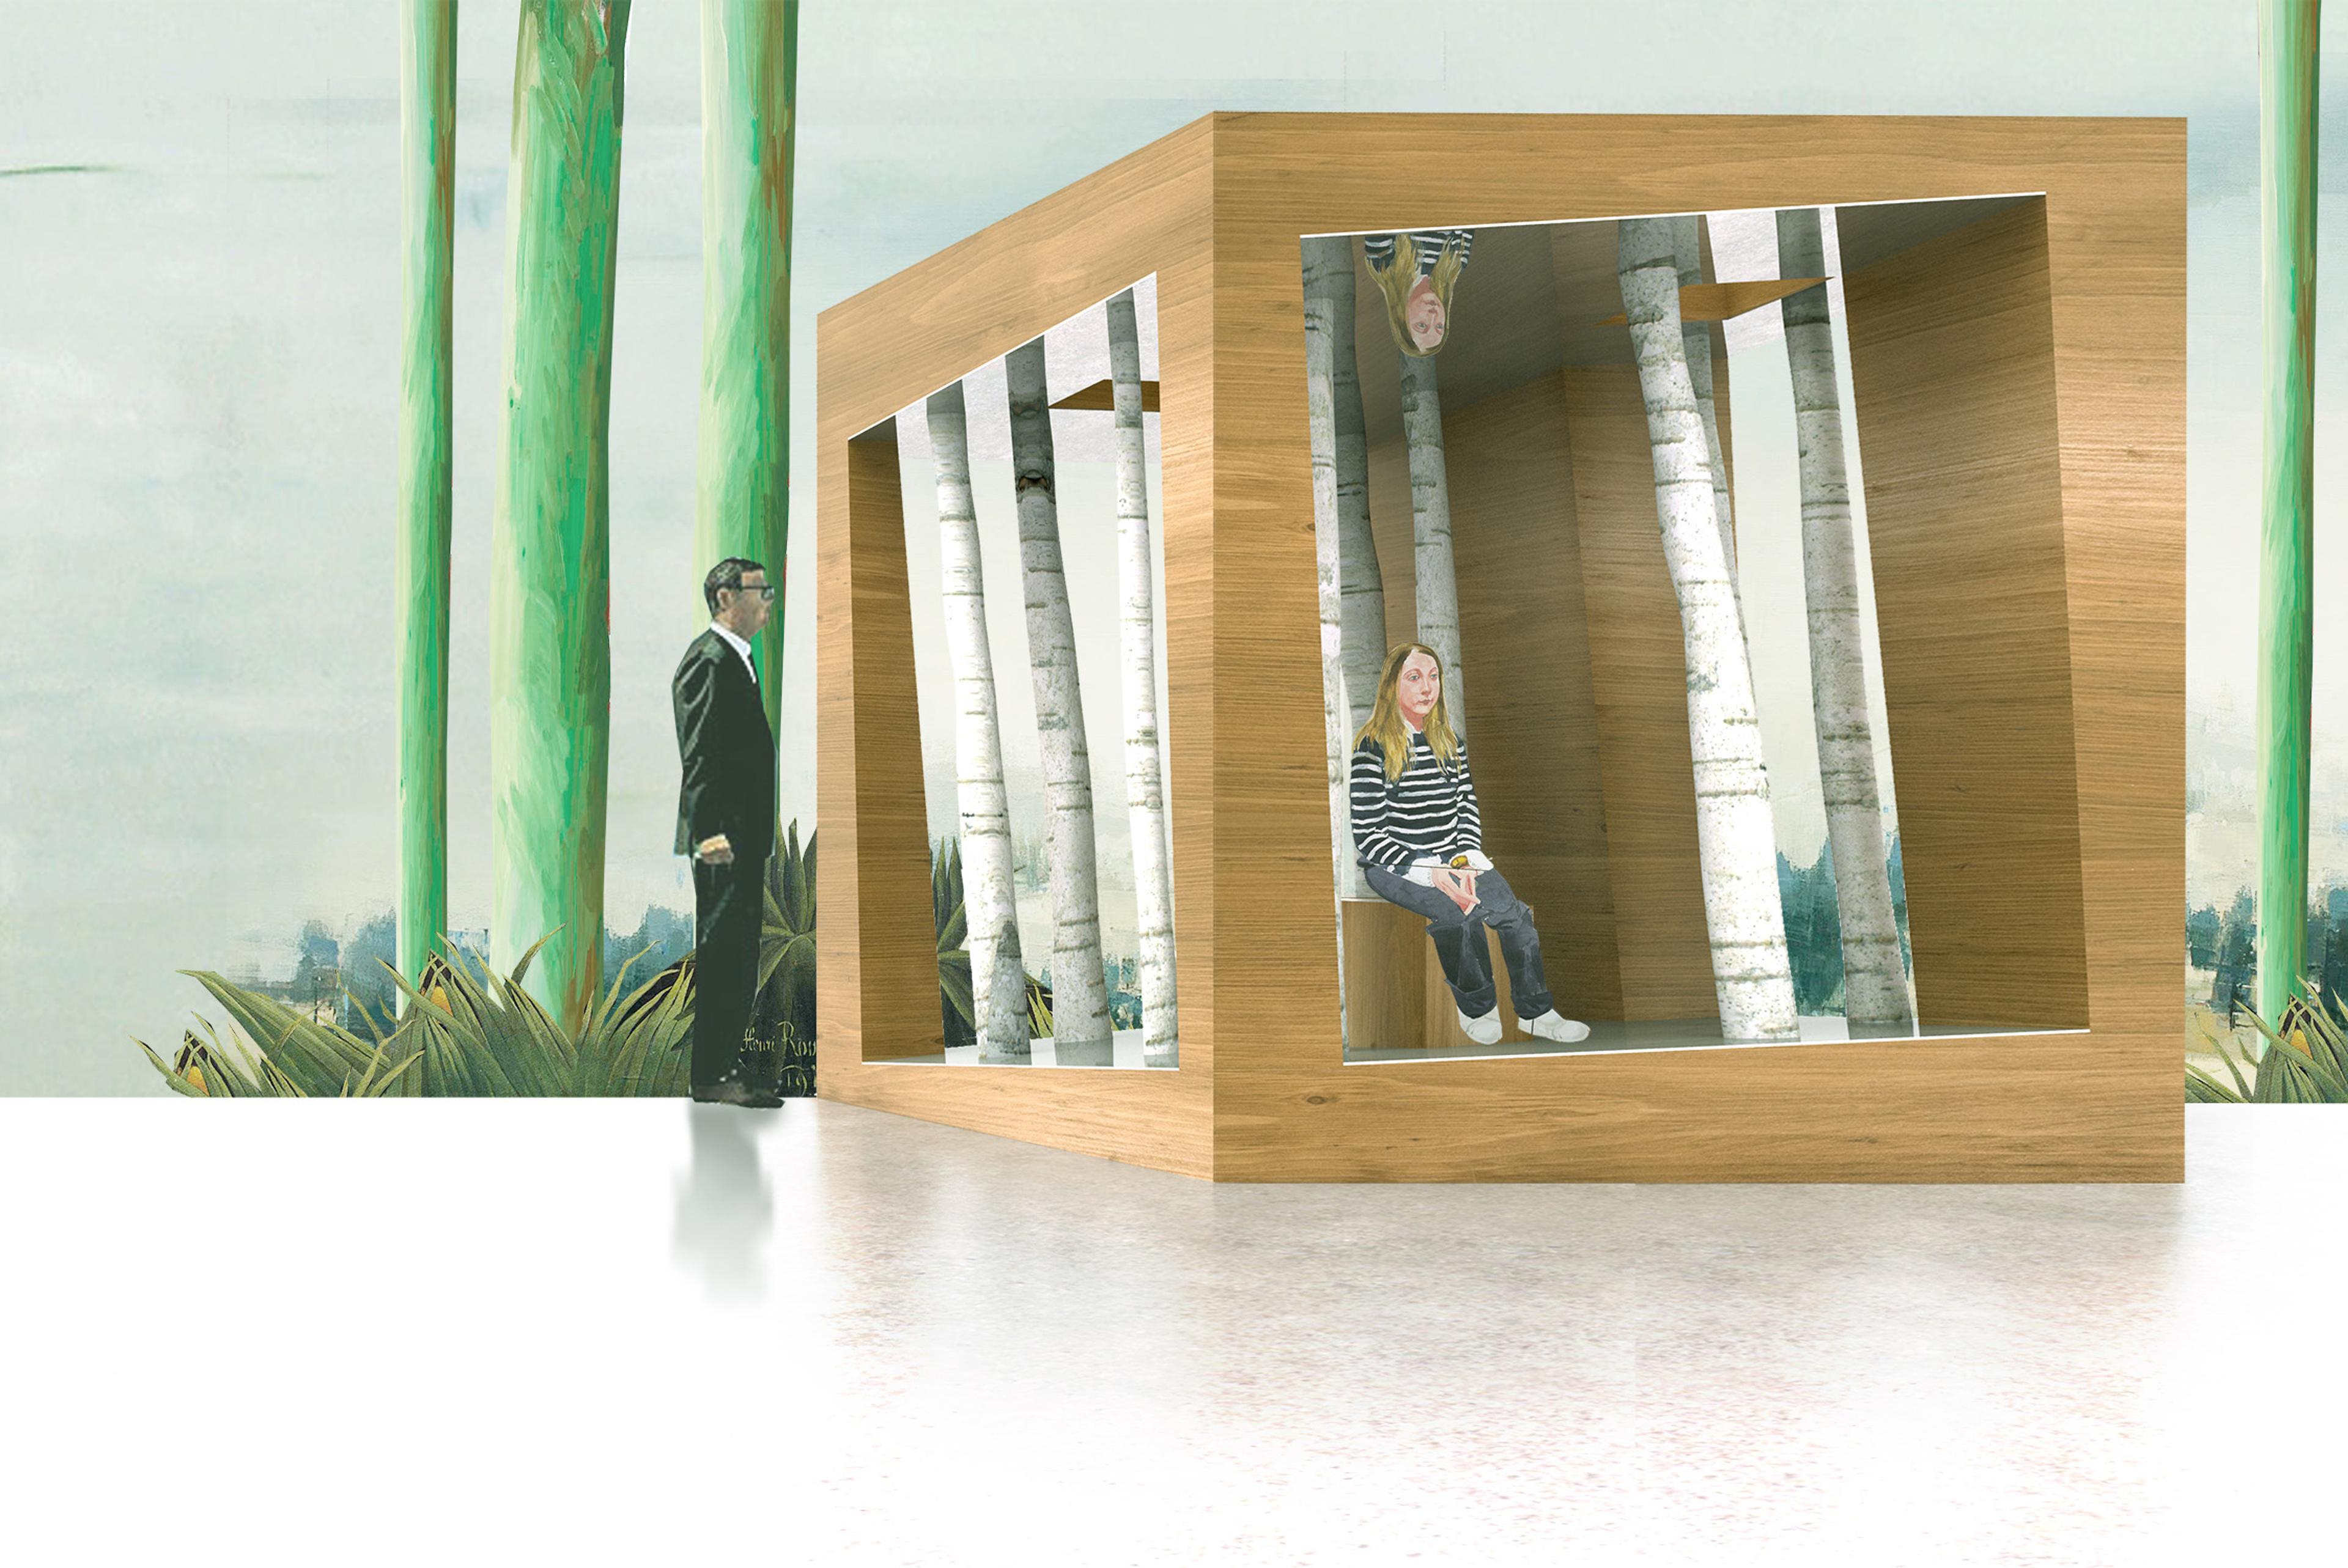 rendering of a pavilion that resembles a box with people sitting inside